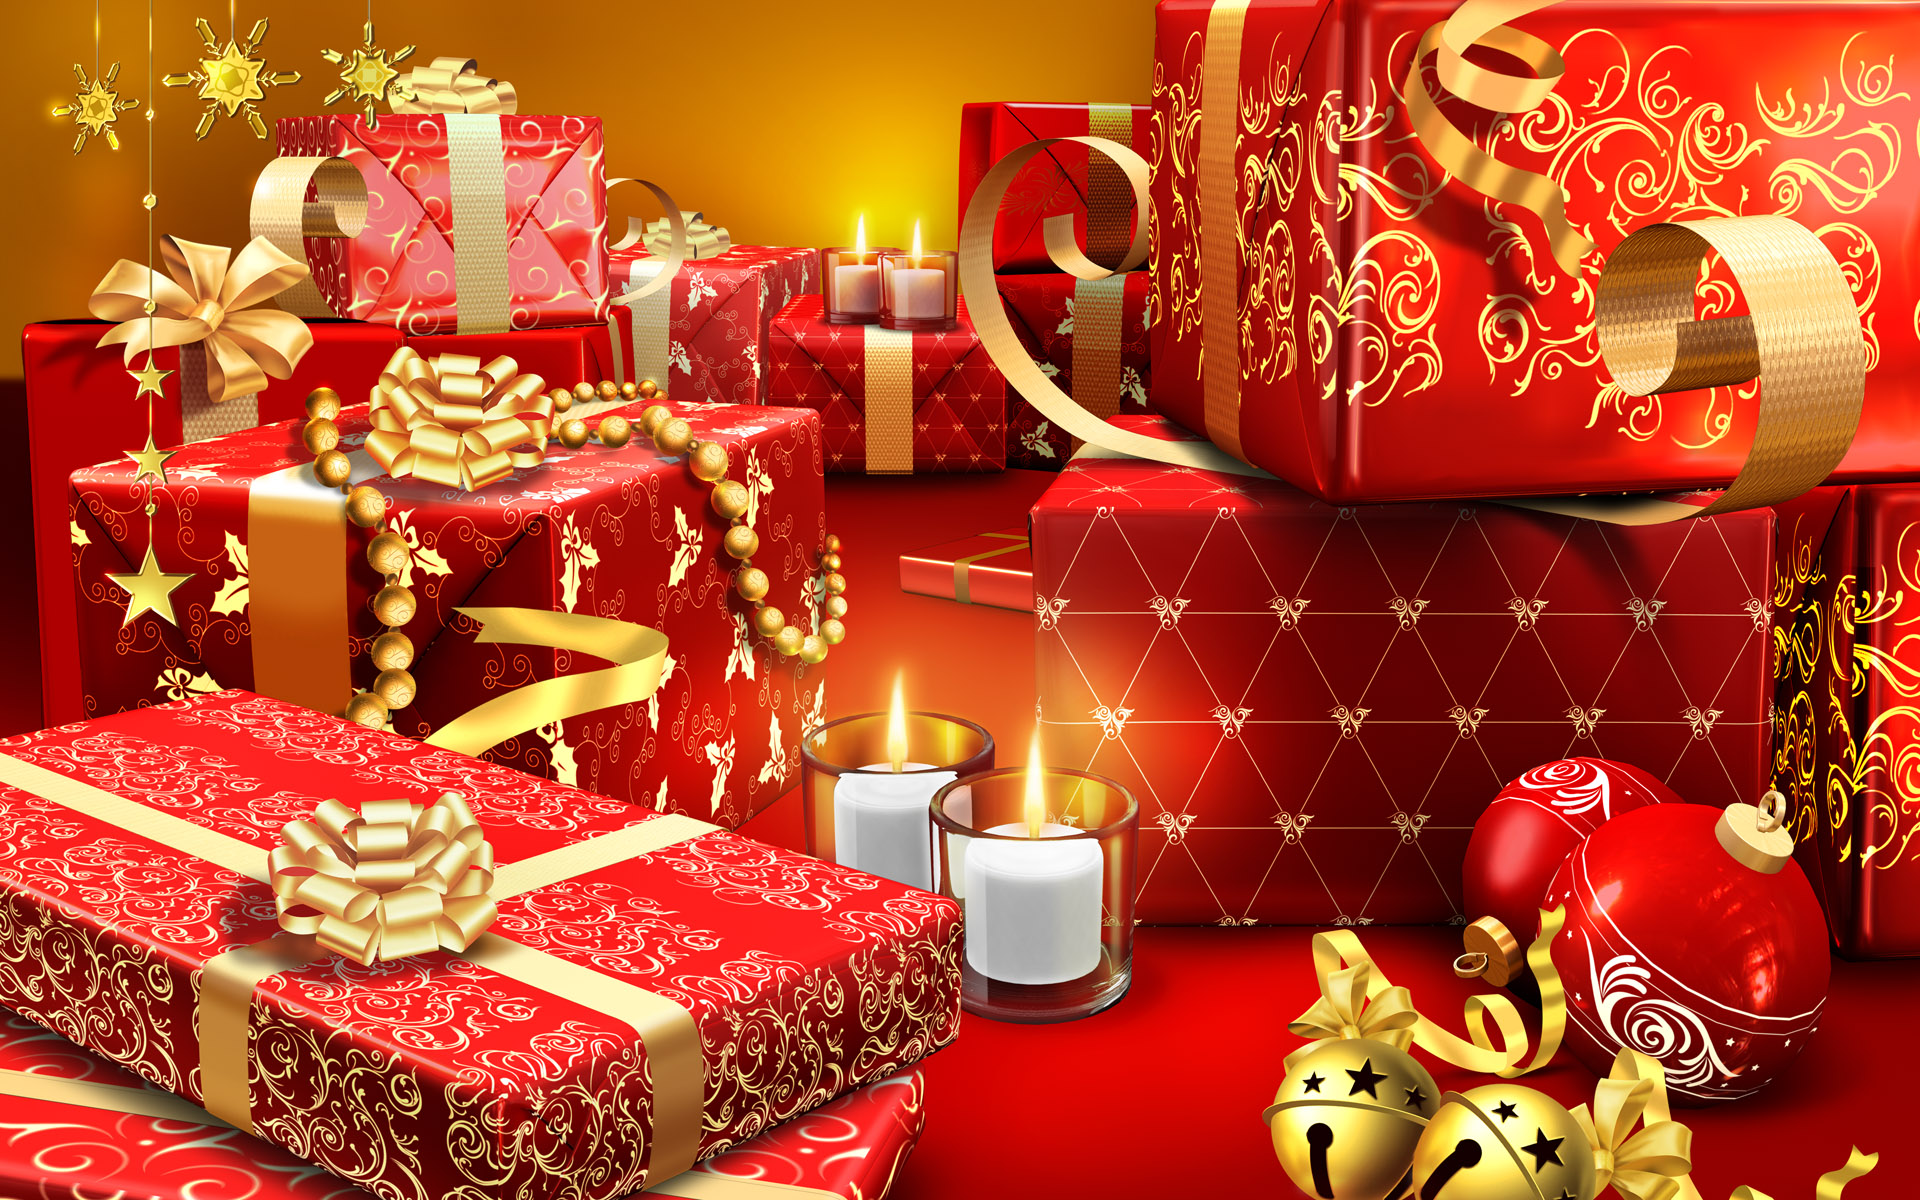 2.gifts